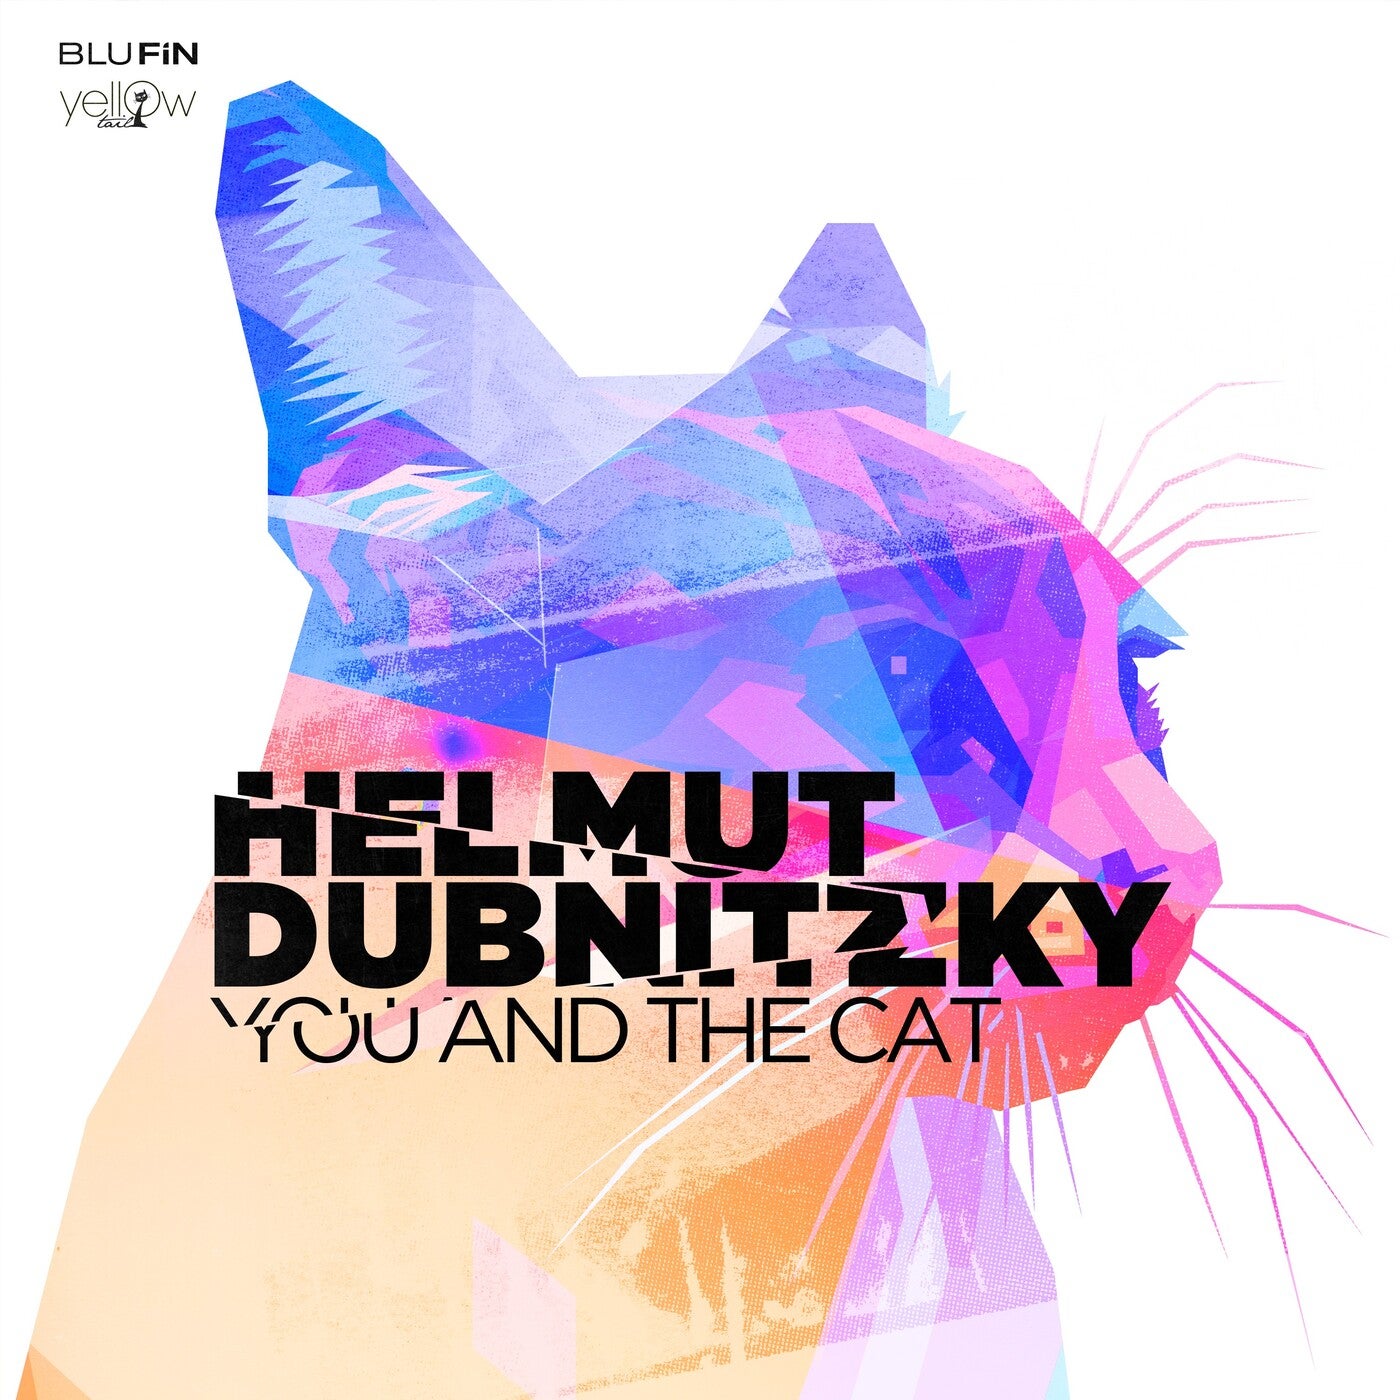 Helmut Dubnitzky – You and the Cat [BF331]